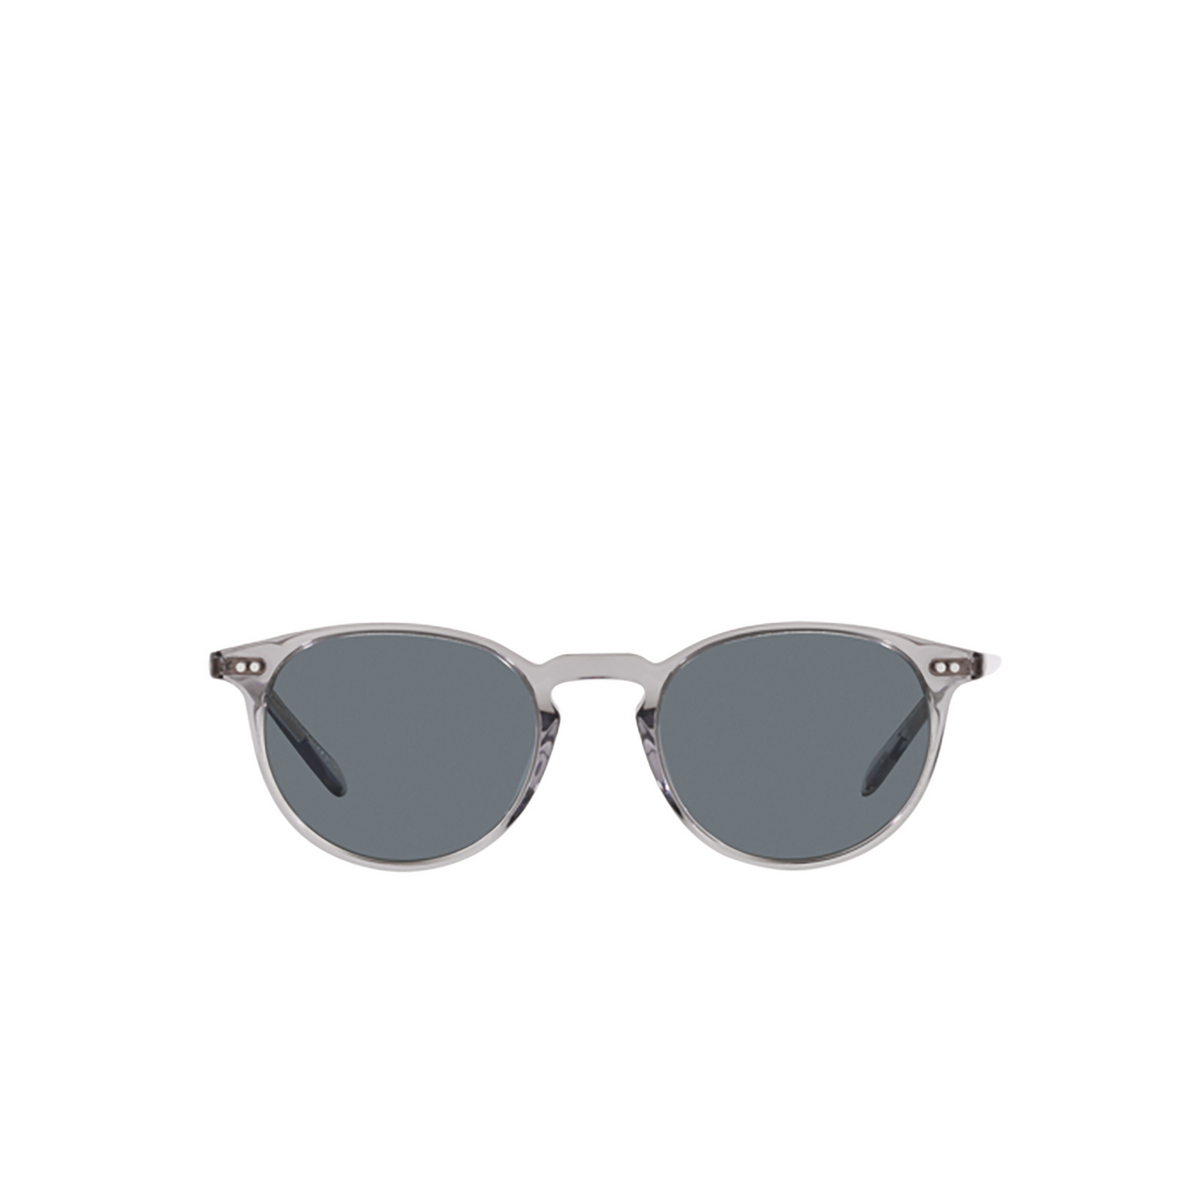 Oliver Peoples RILEY Sunglasses 1132R8 Workman Grey - front view